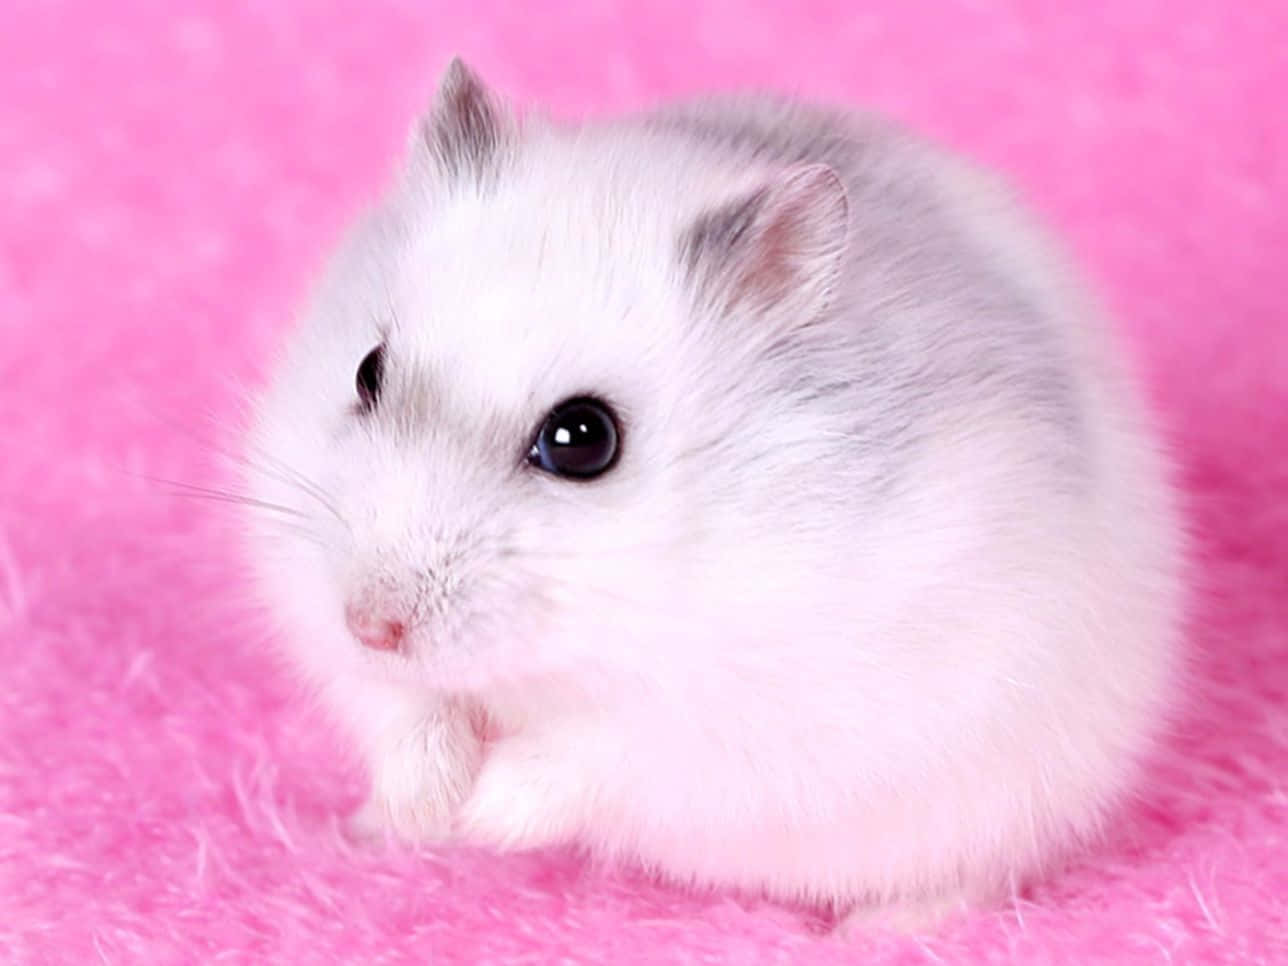 A Cute And Fluffy Hamster Looking Around. Wallpaper